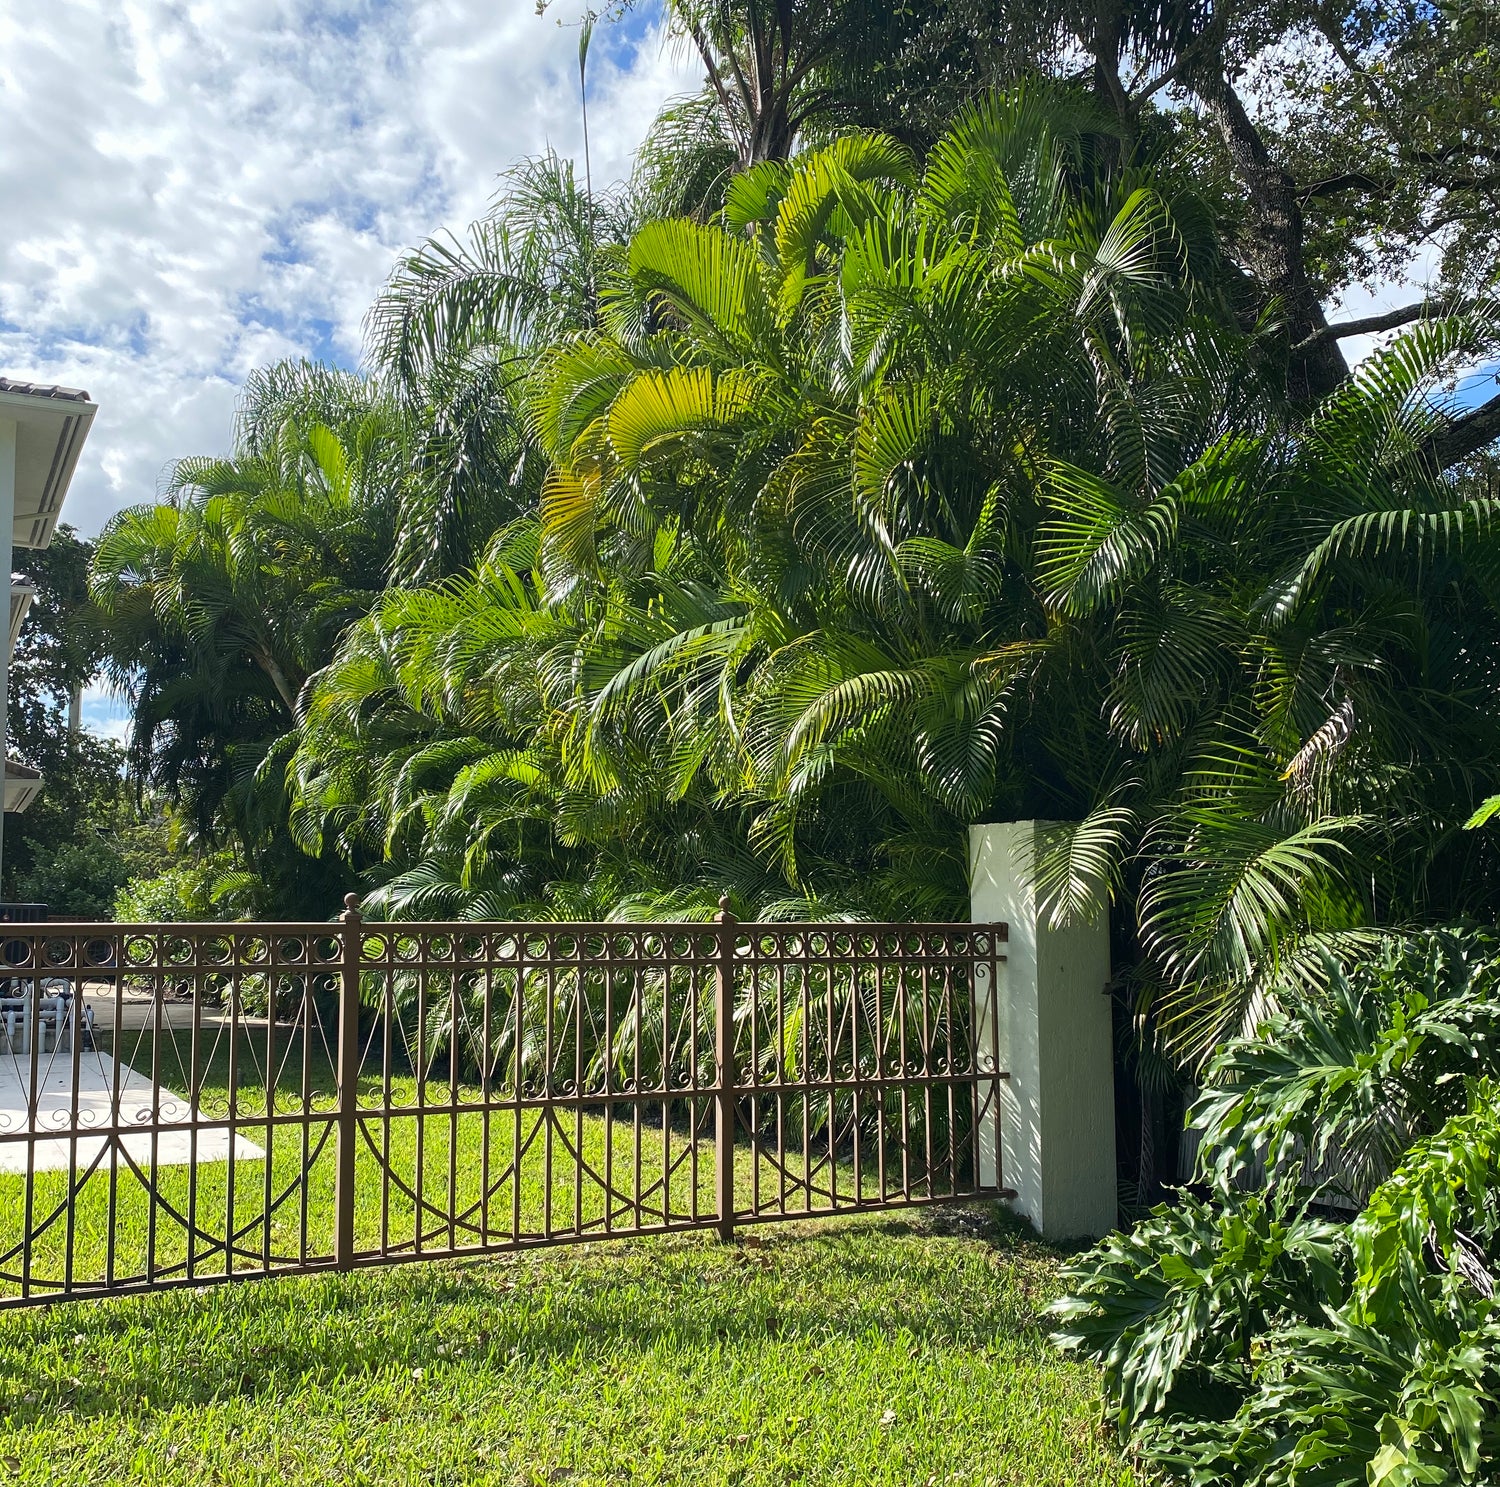 Areca Palm, Golden Cane, Dypsis Lutescens outside of a house